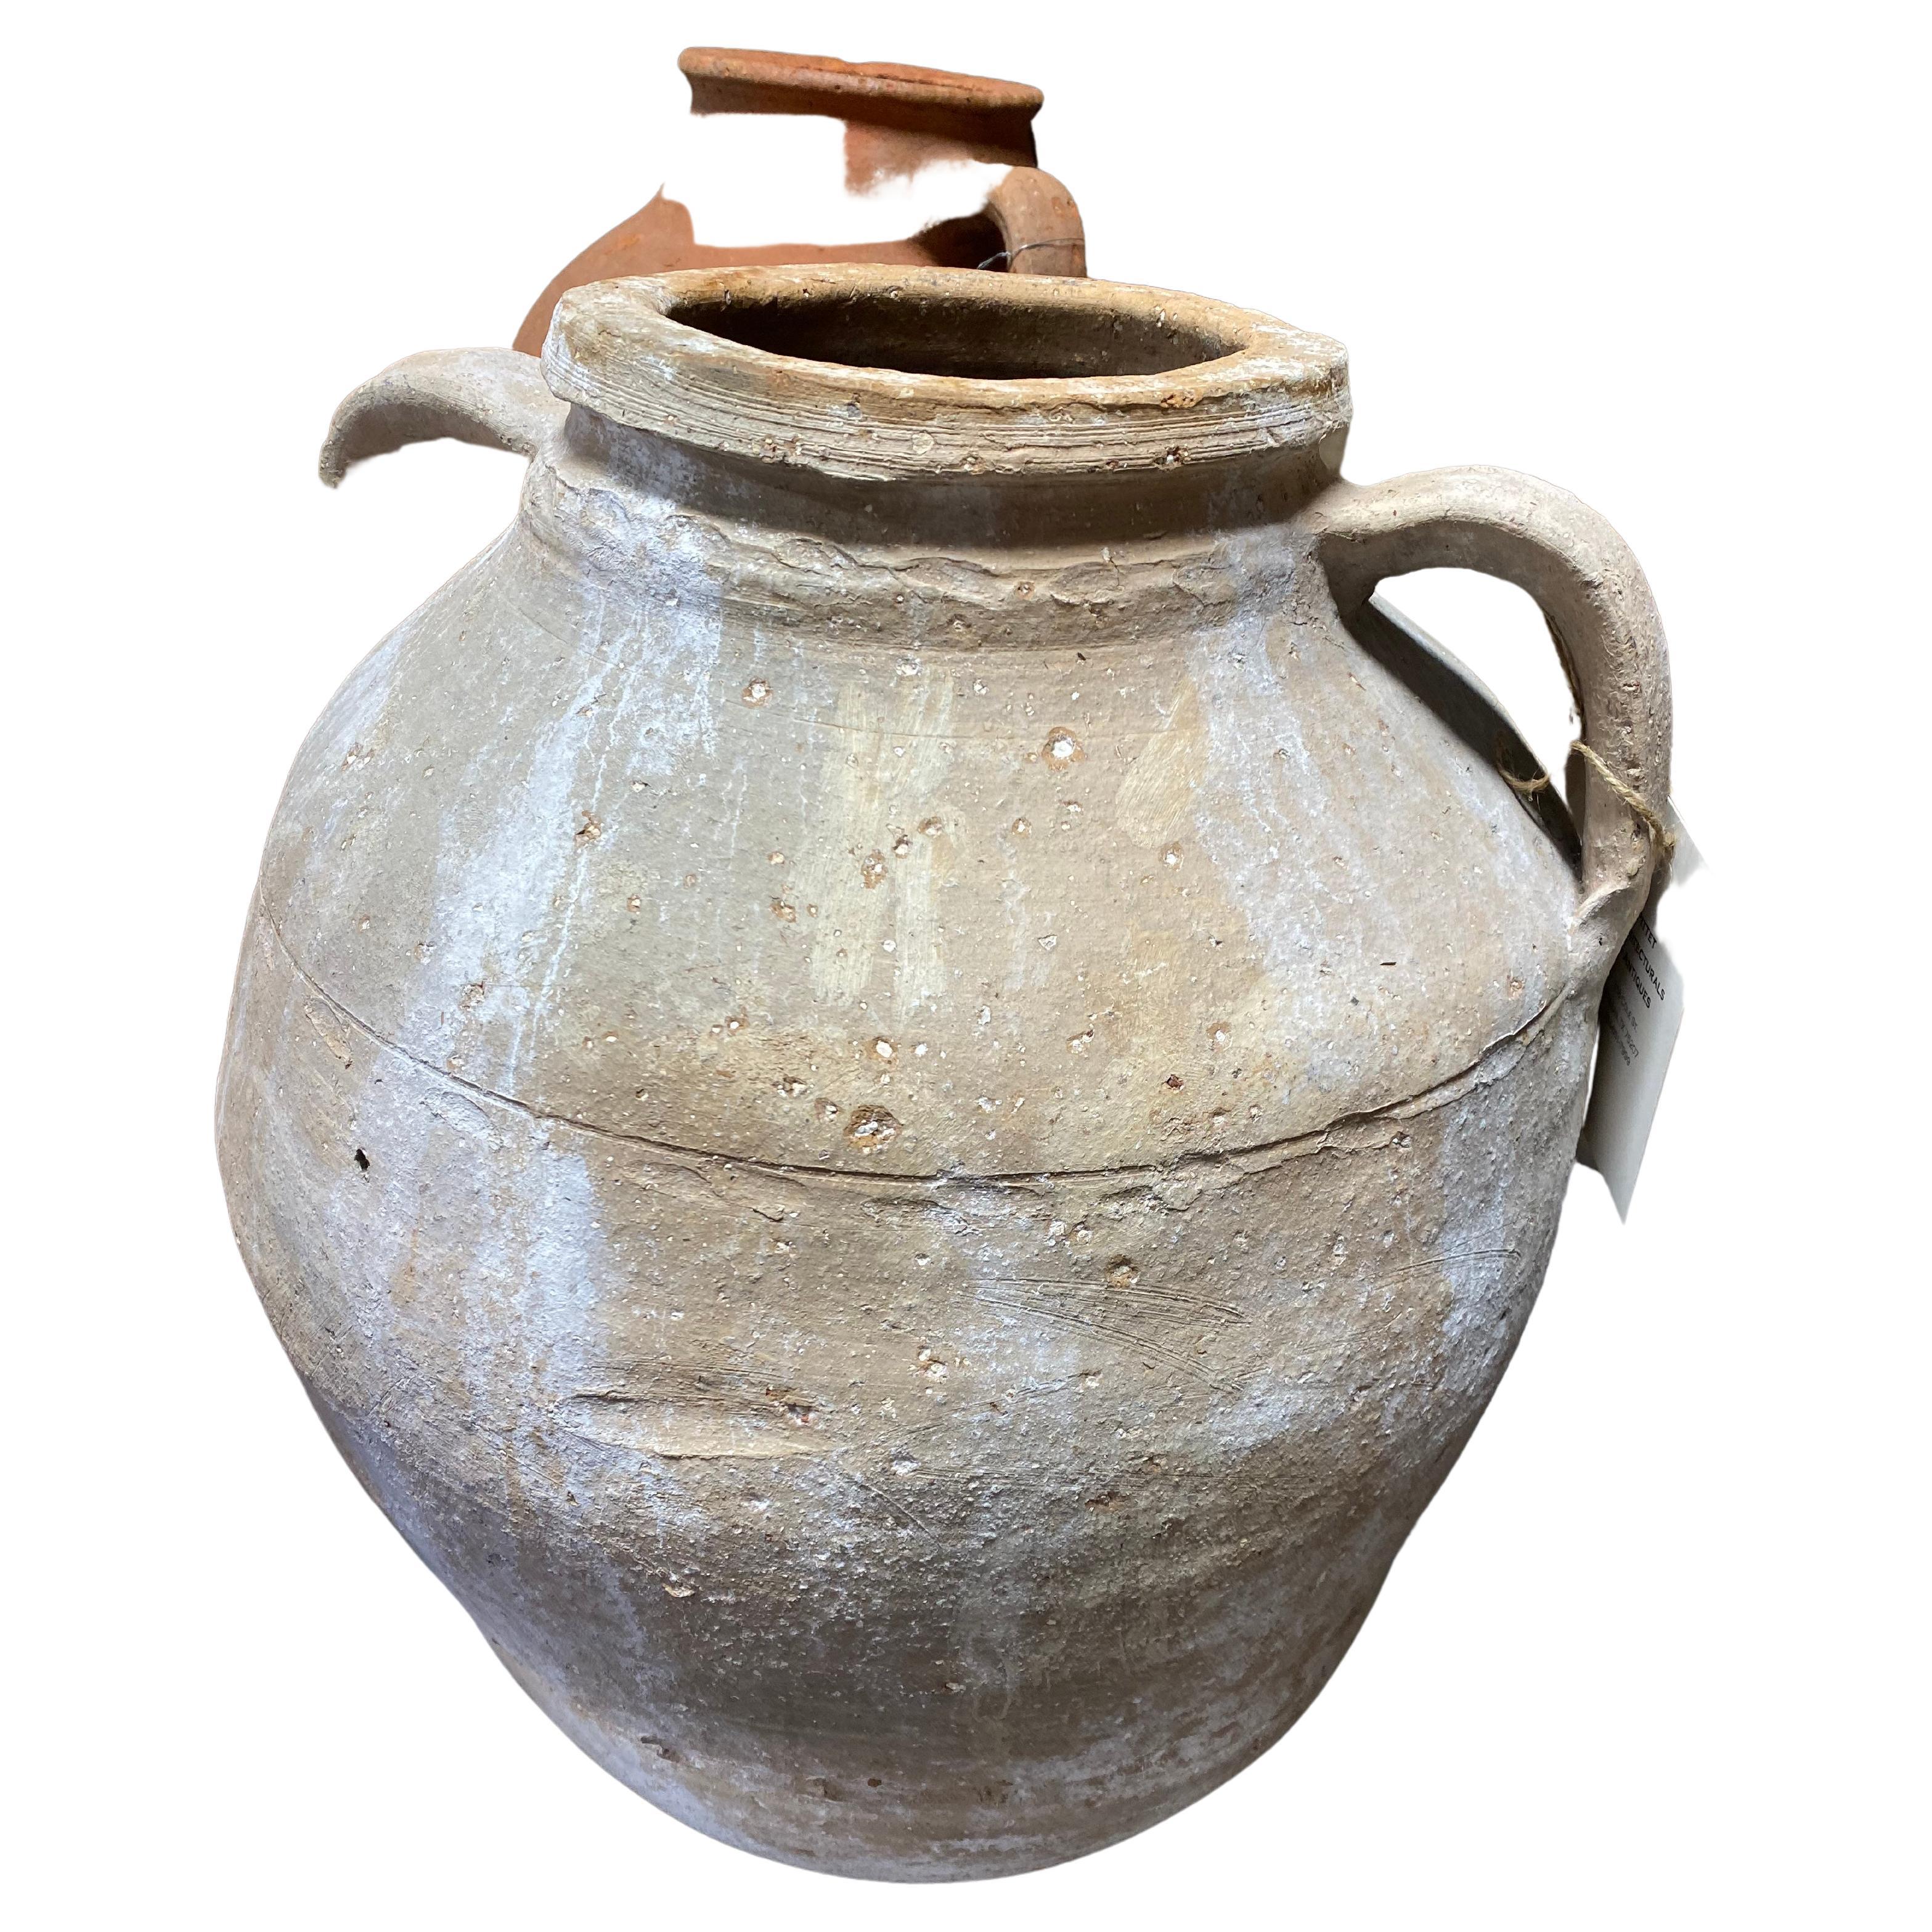 This lovely vessel is in a light taupe color. It is sold as an individual item and originates from Greece. Circa 1880s.